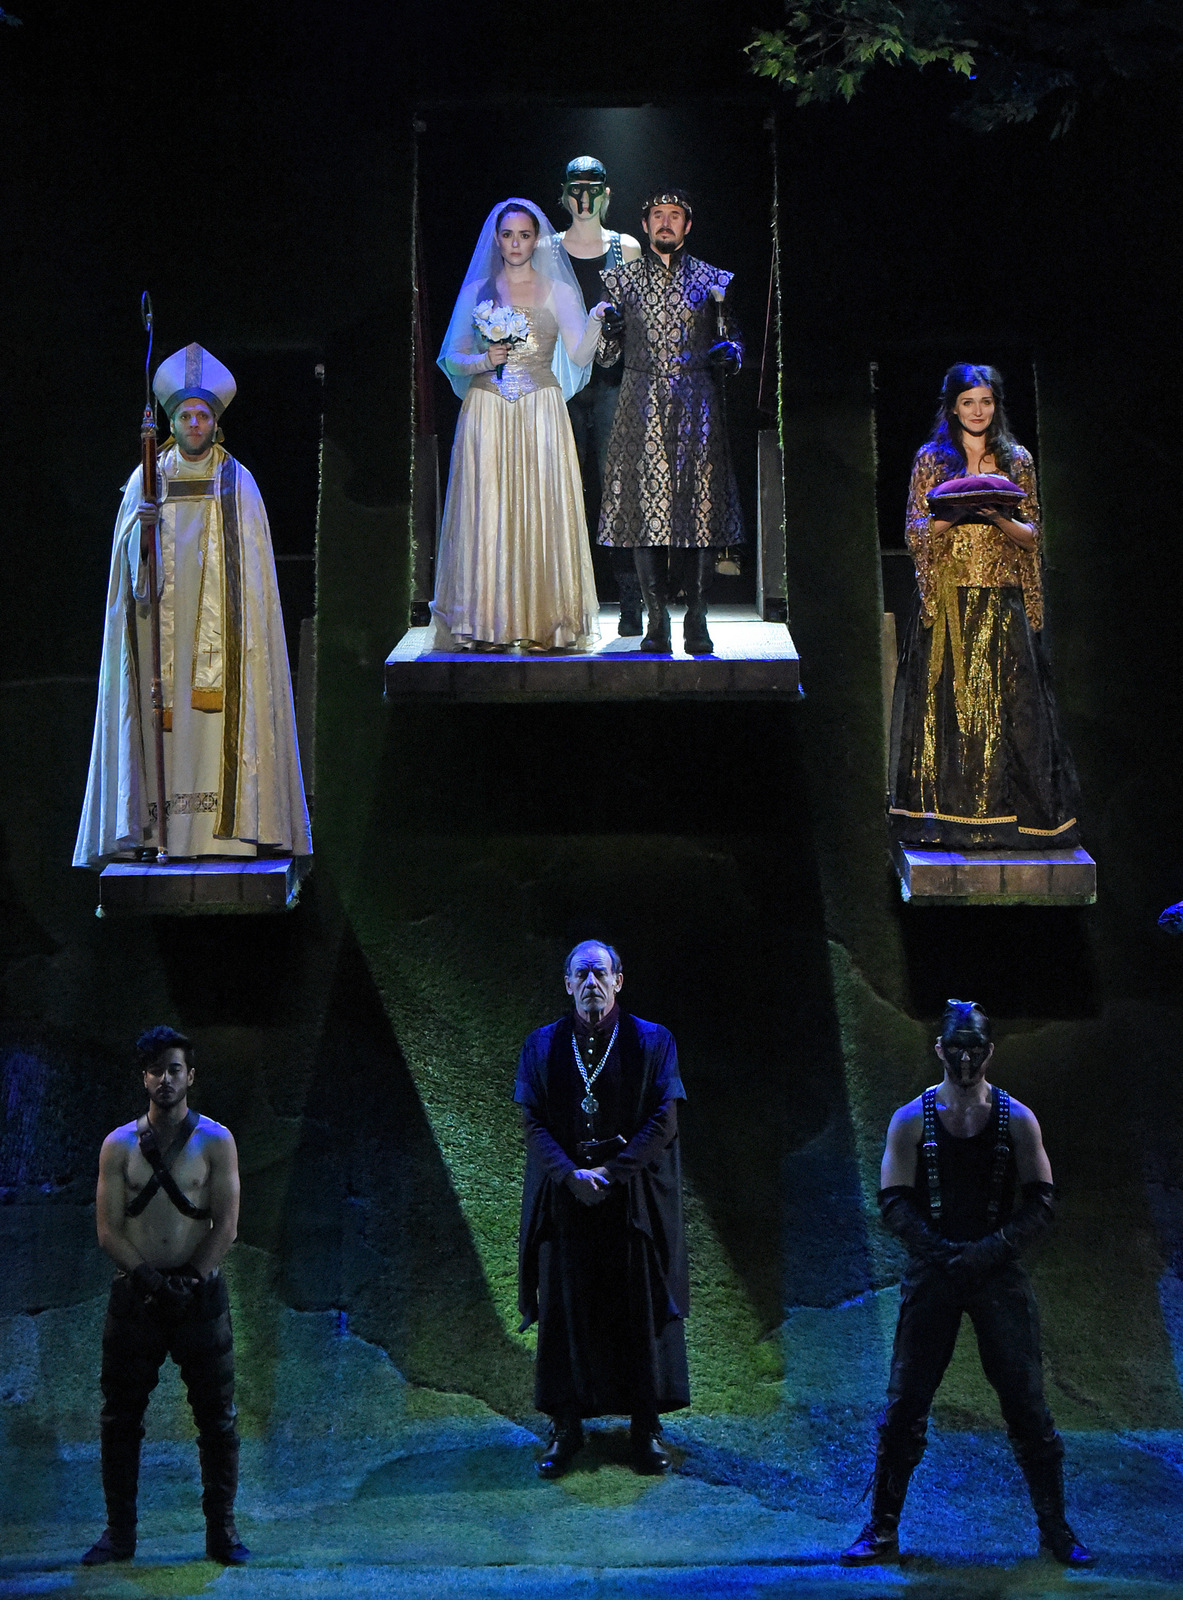 Vesturport and The Wallis’ The Heart of Robin Hood. Pictured (l-r): Cast of The Heart of Robin Hood. Photo credit: Kevin Parry for The Wallis.